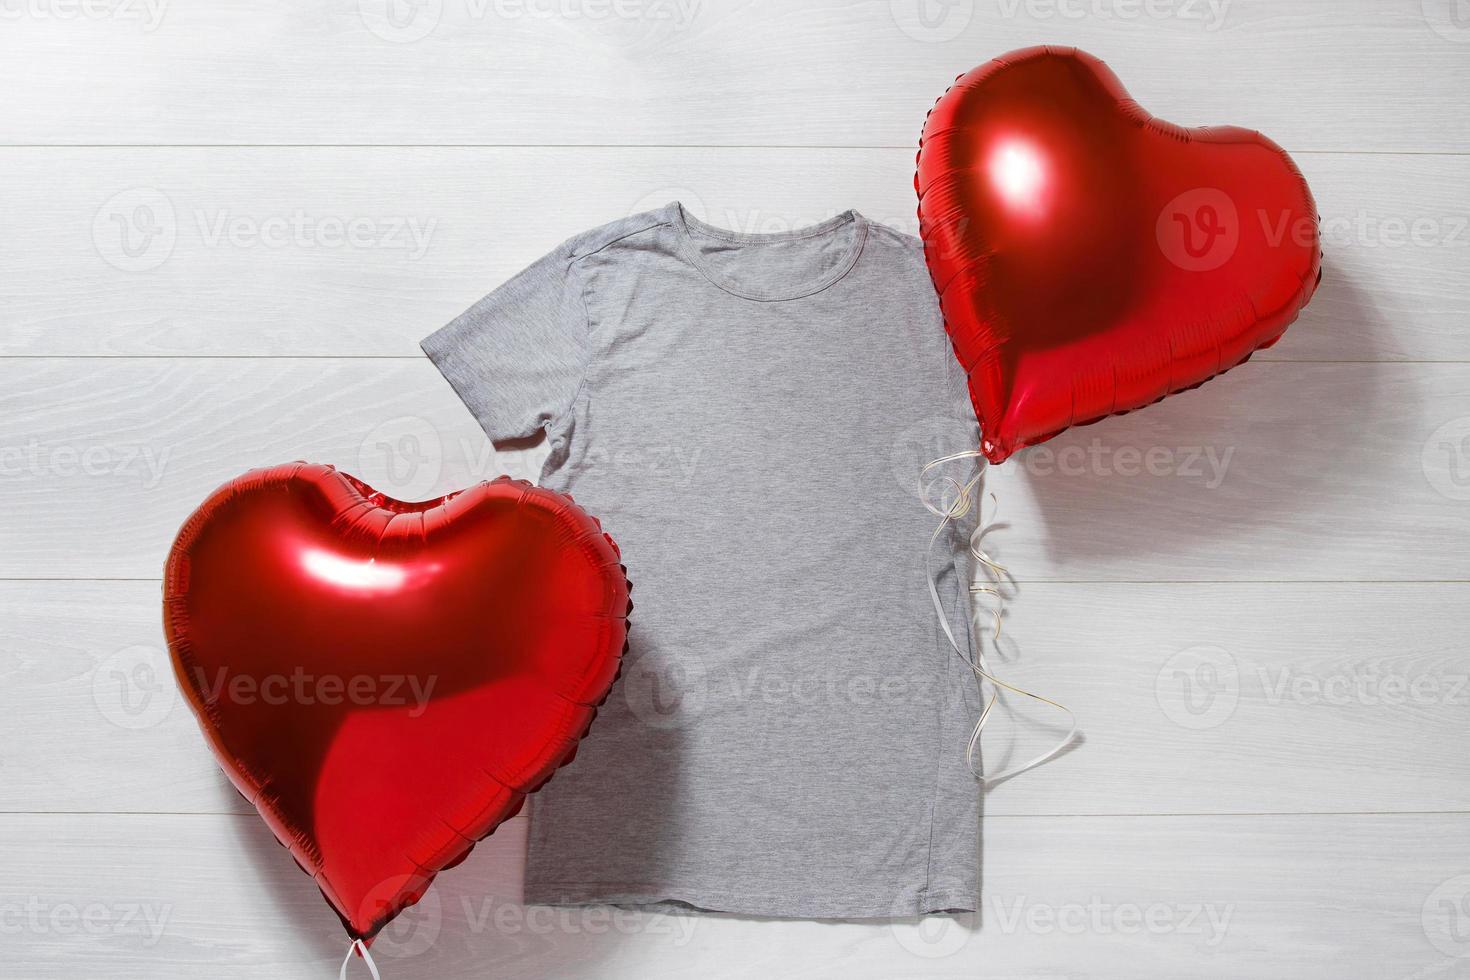 Grey tshirt mockup. Valentines Day concept shirt, balloons heart shape on wooden background. Copy space, template blank front view t-shirt clothes. Romantic outfit. Flat lay birthday holiday fashion photo